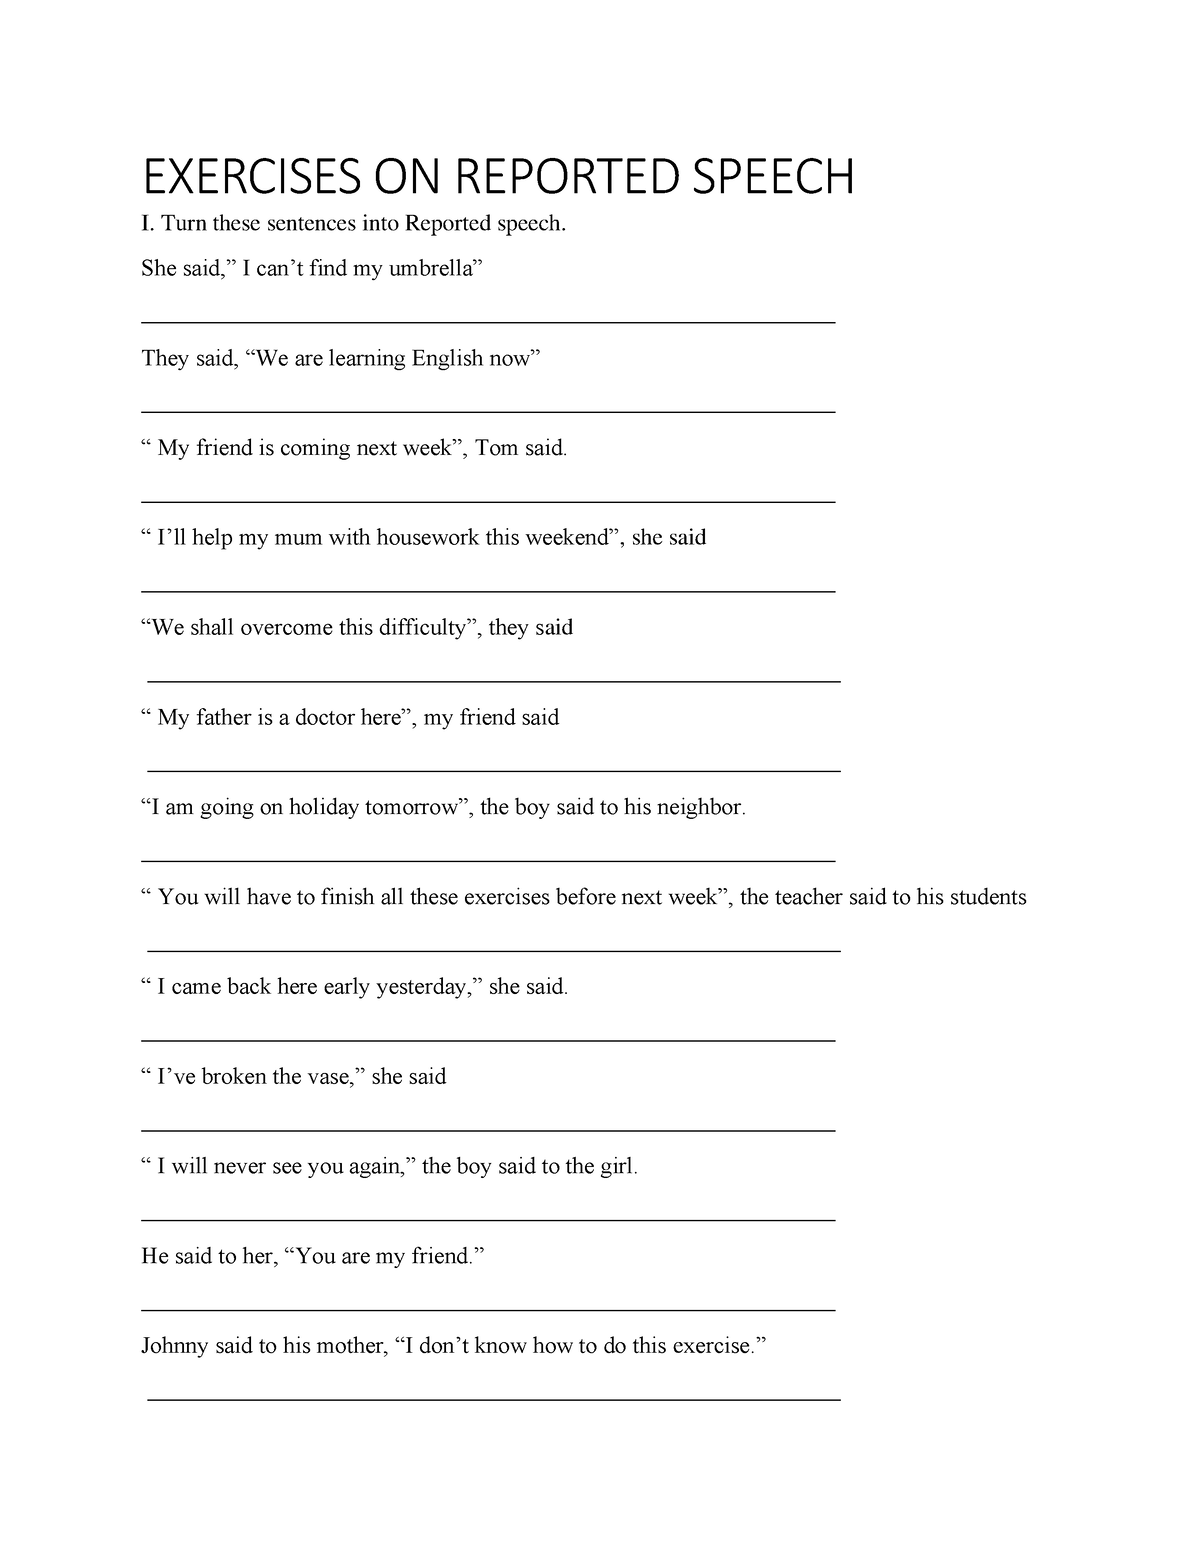 reported speech exercises text